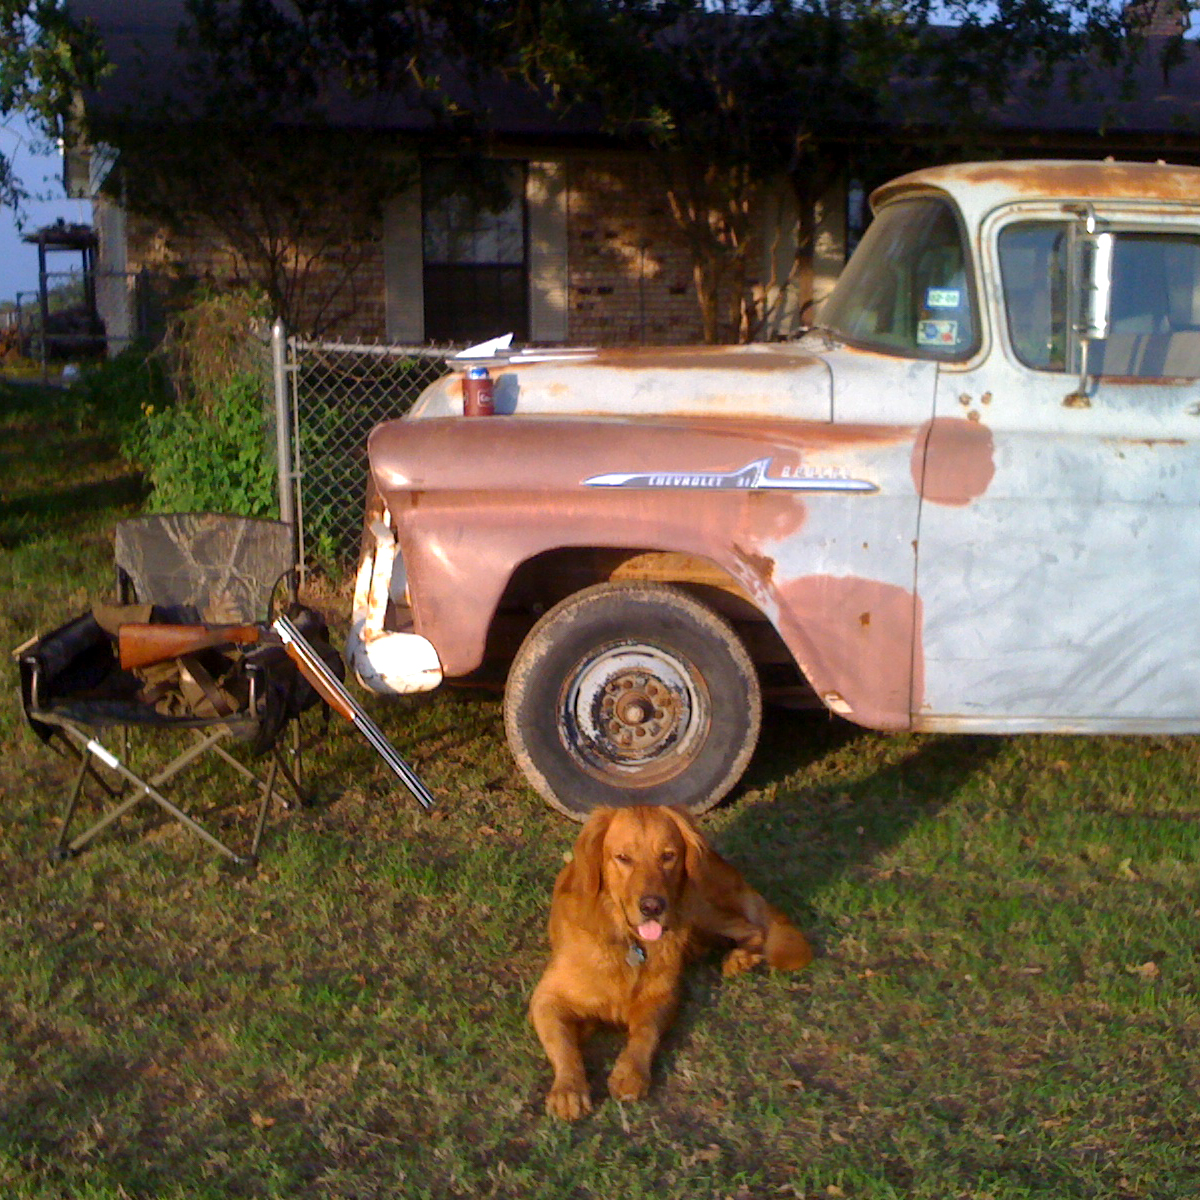 Dog and truck